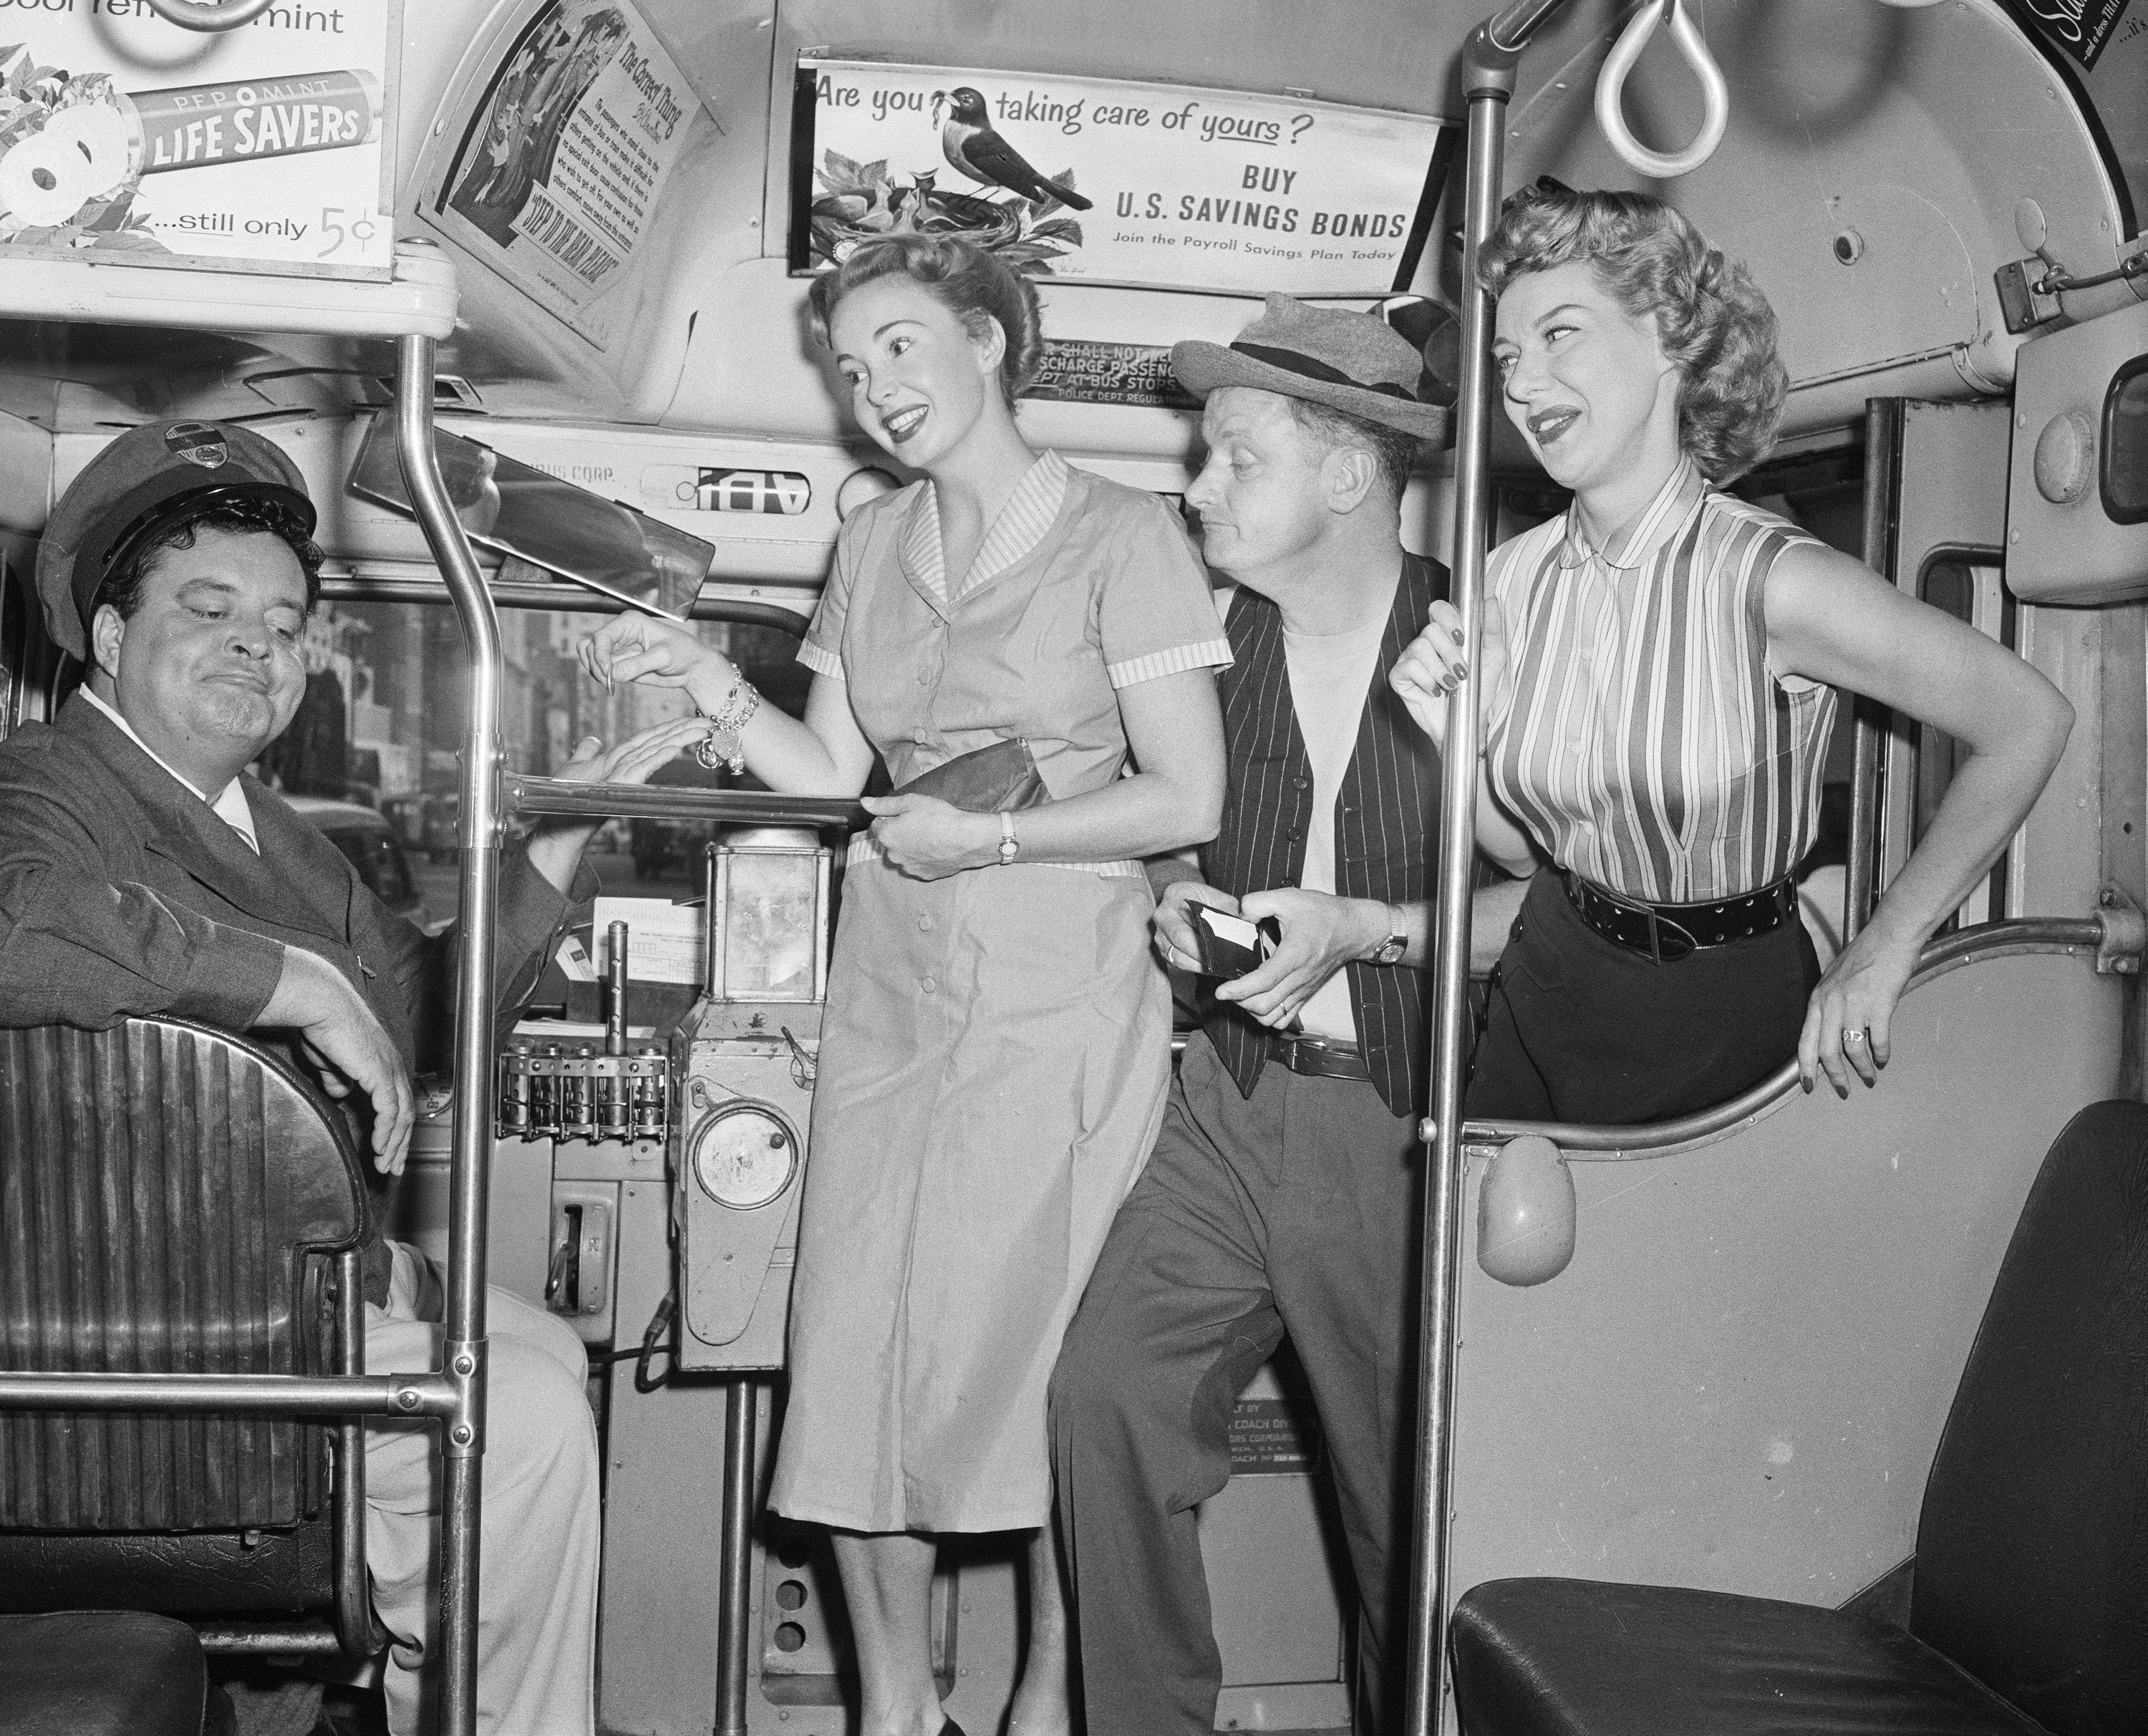 The cast of 'The Honeymooners' aboard a bus in 1955: Jackie Gleason as Ralph Kramden is in the driver's seat, while Audrey Meadows as Alice Kramden, Art Carney as Ed Norton and Joyce Randolph as Trixie Norton climb aboard